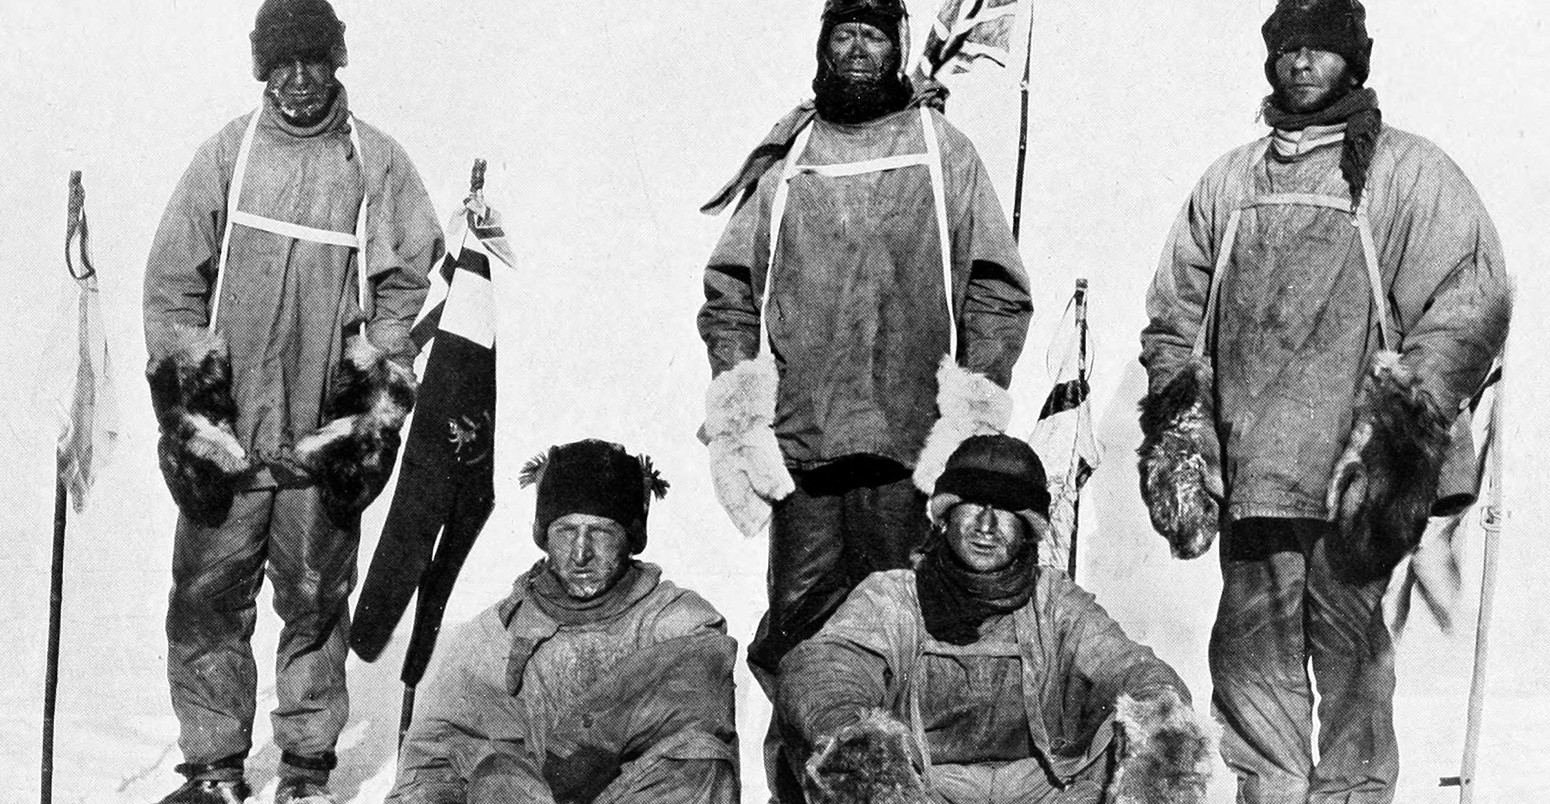 Robert Falcon Scott's ill-fated expedition party at the South Party, 17 January 1912